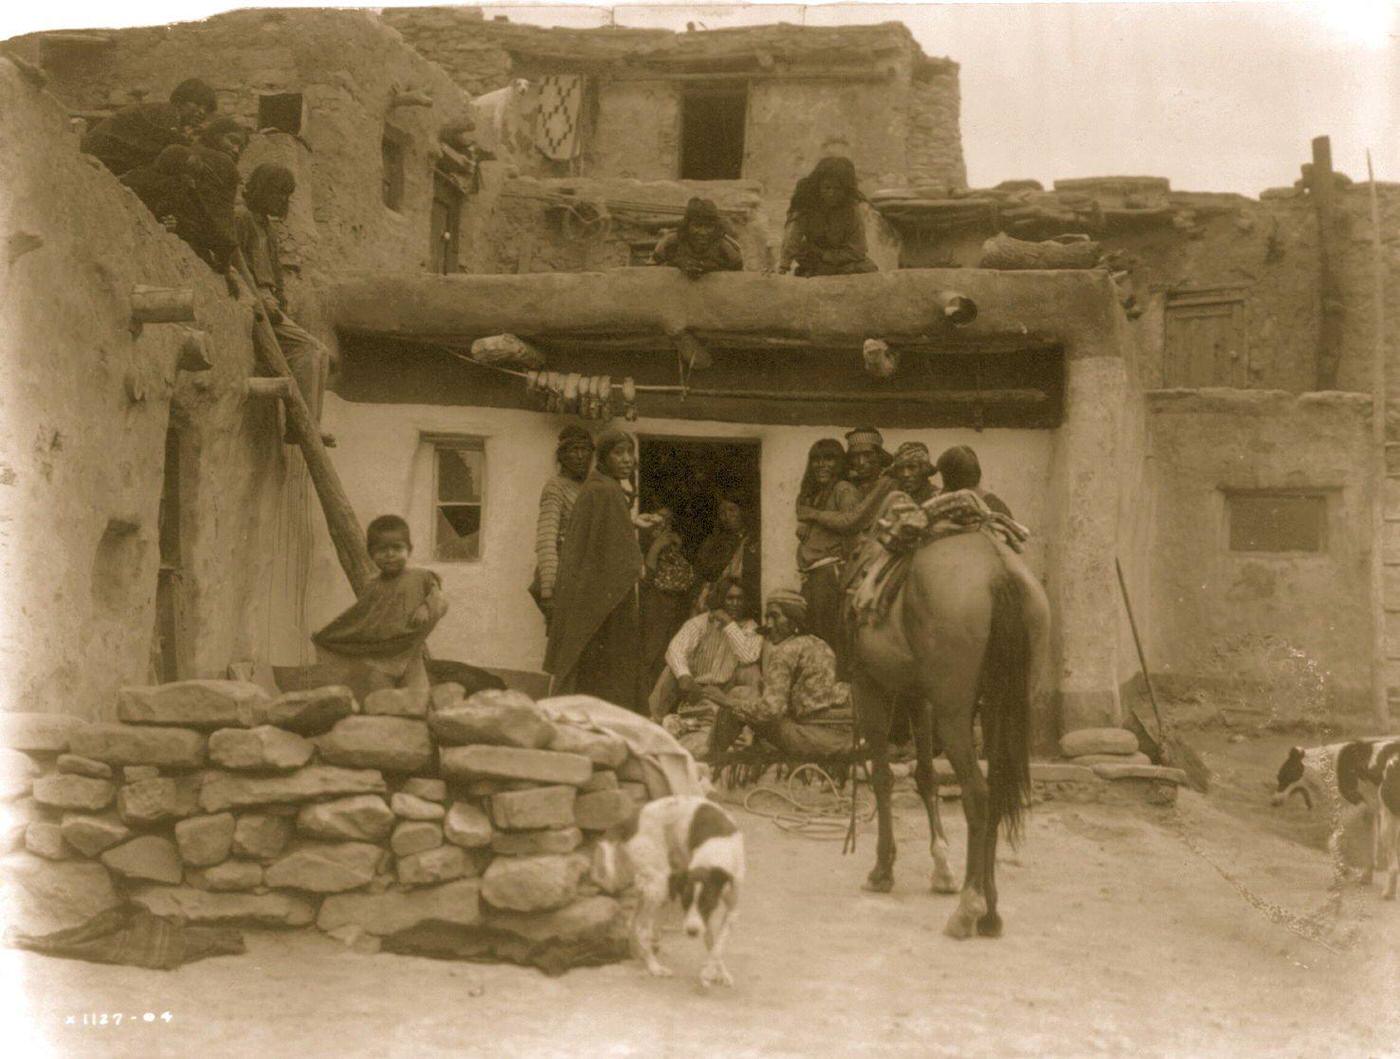 Hopi adults gather outside doorway, children on roof, dogs and horse in foreground, 1905